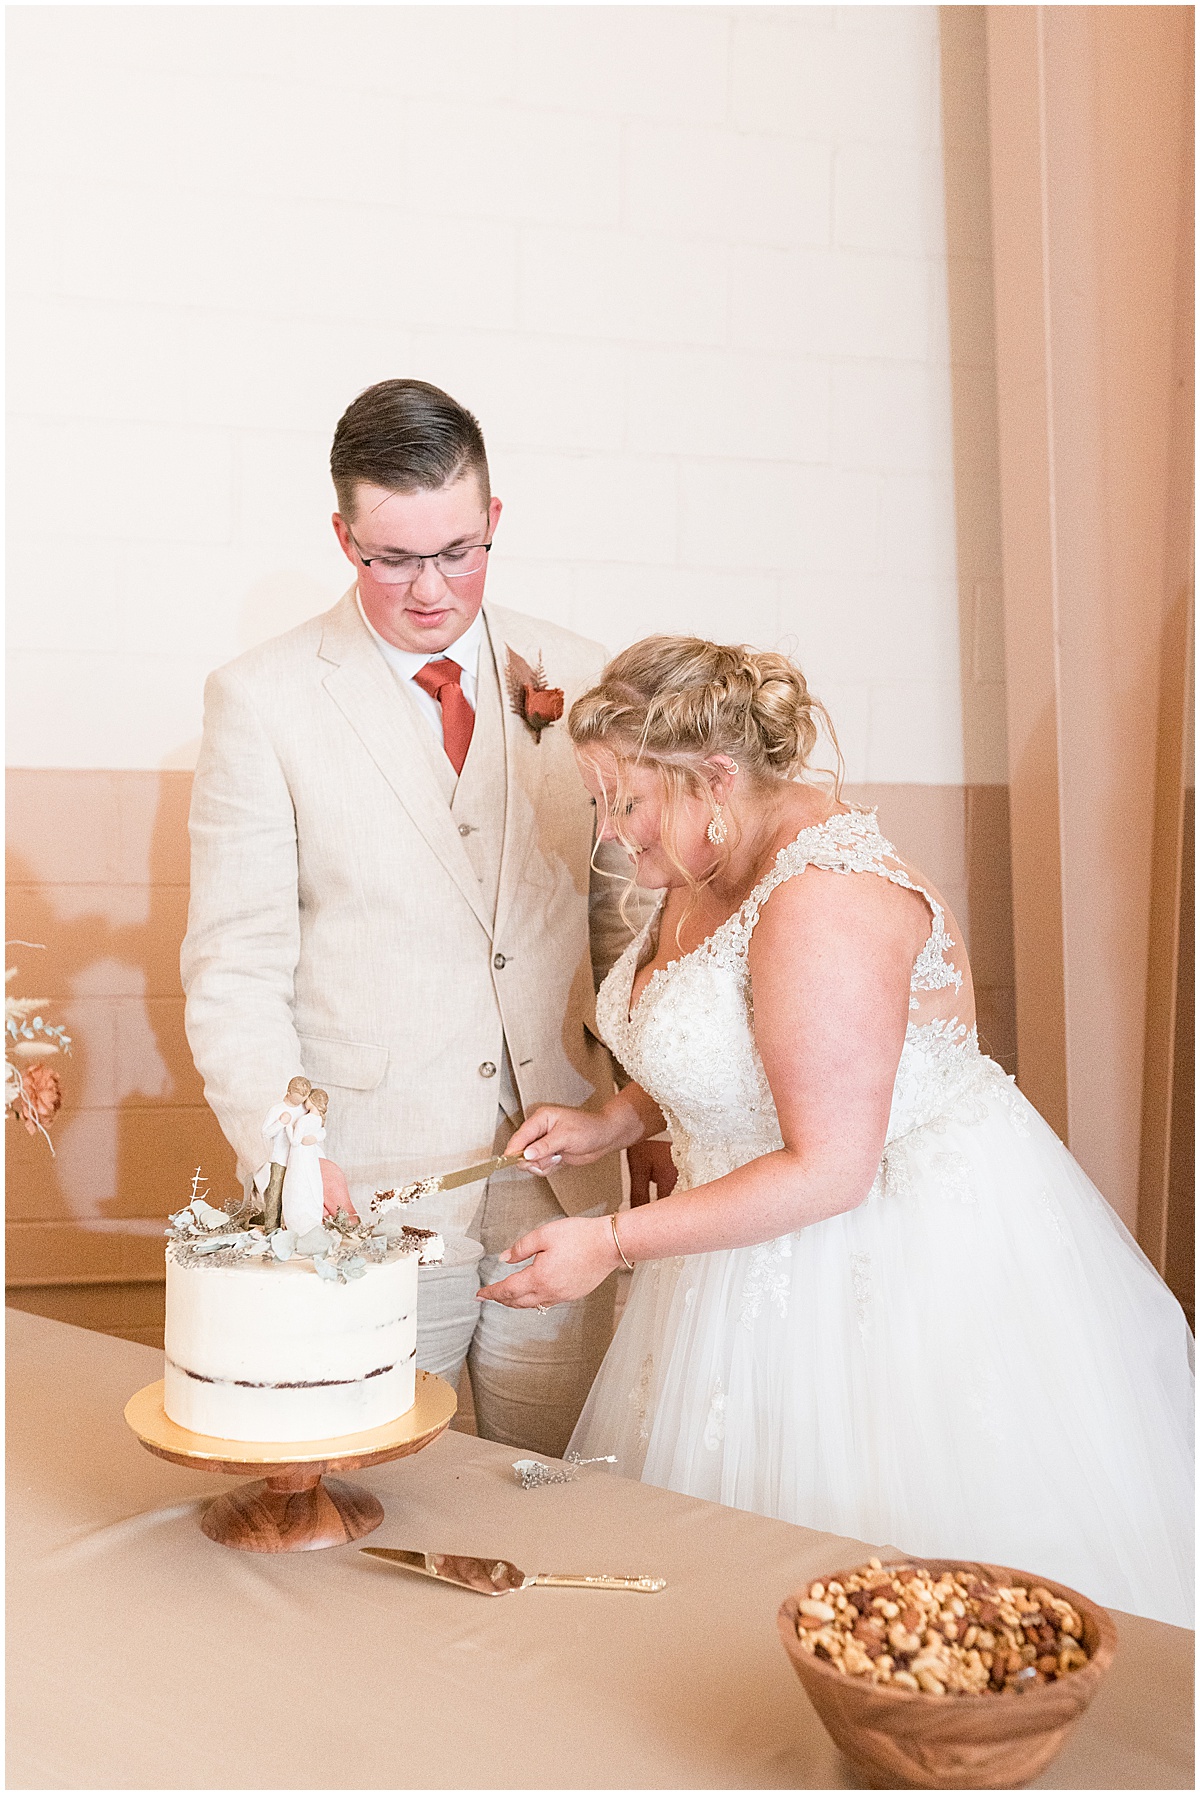 Cutting the cake at Miami County Fairgrounds wedding in Peru, Indiana